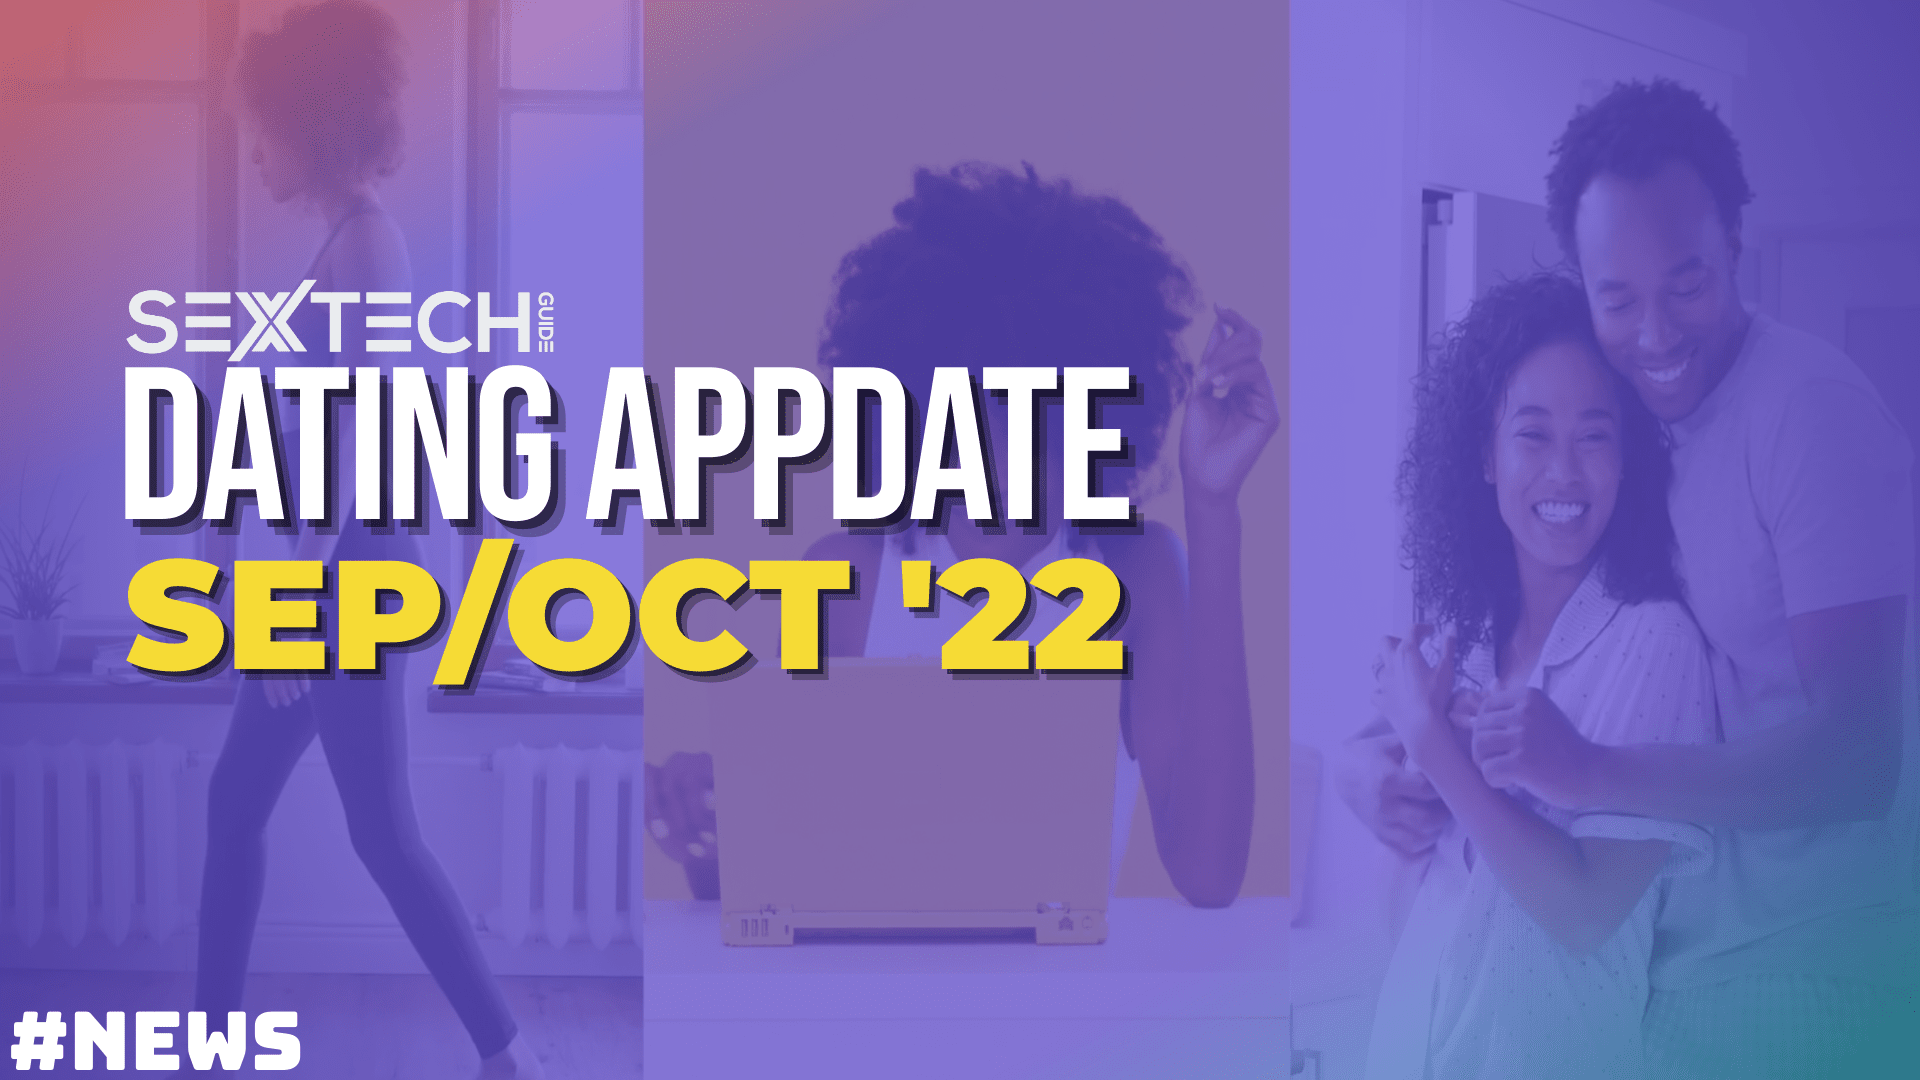 Dating appdates: Marriage Pact sweeps campuses, anti-catfishing and ghosting measures, and dating app for professional black women secures $1M